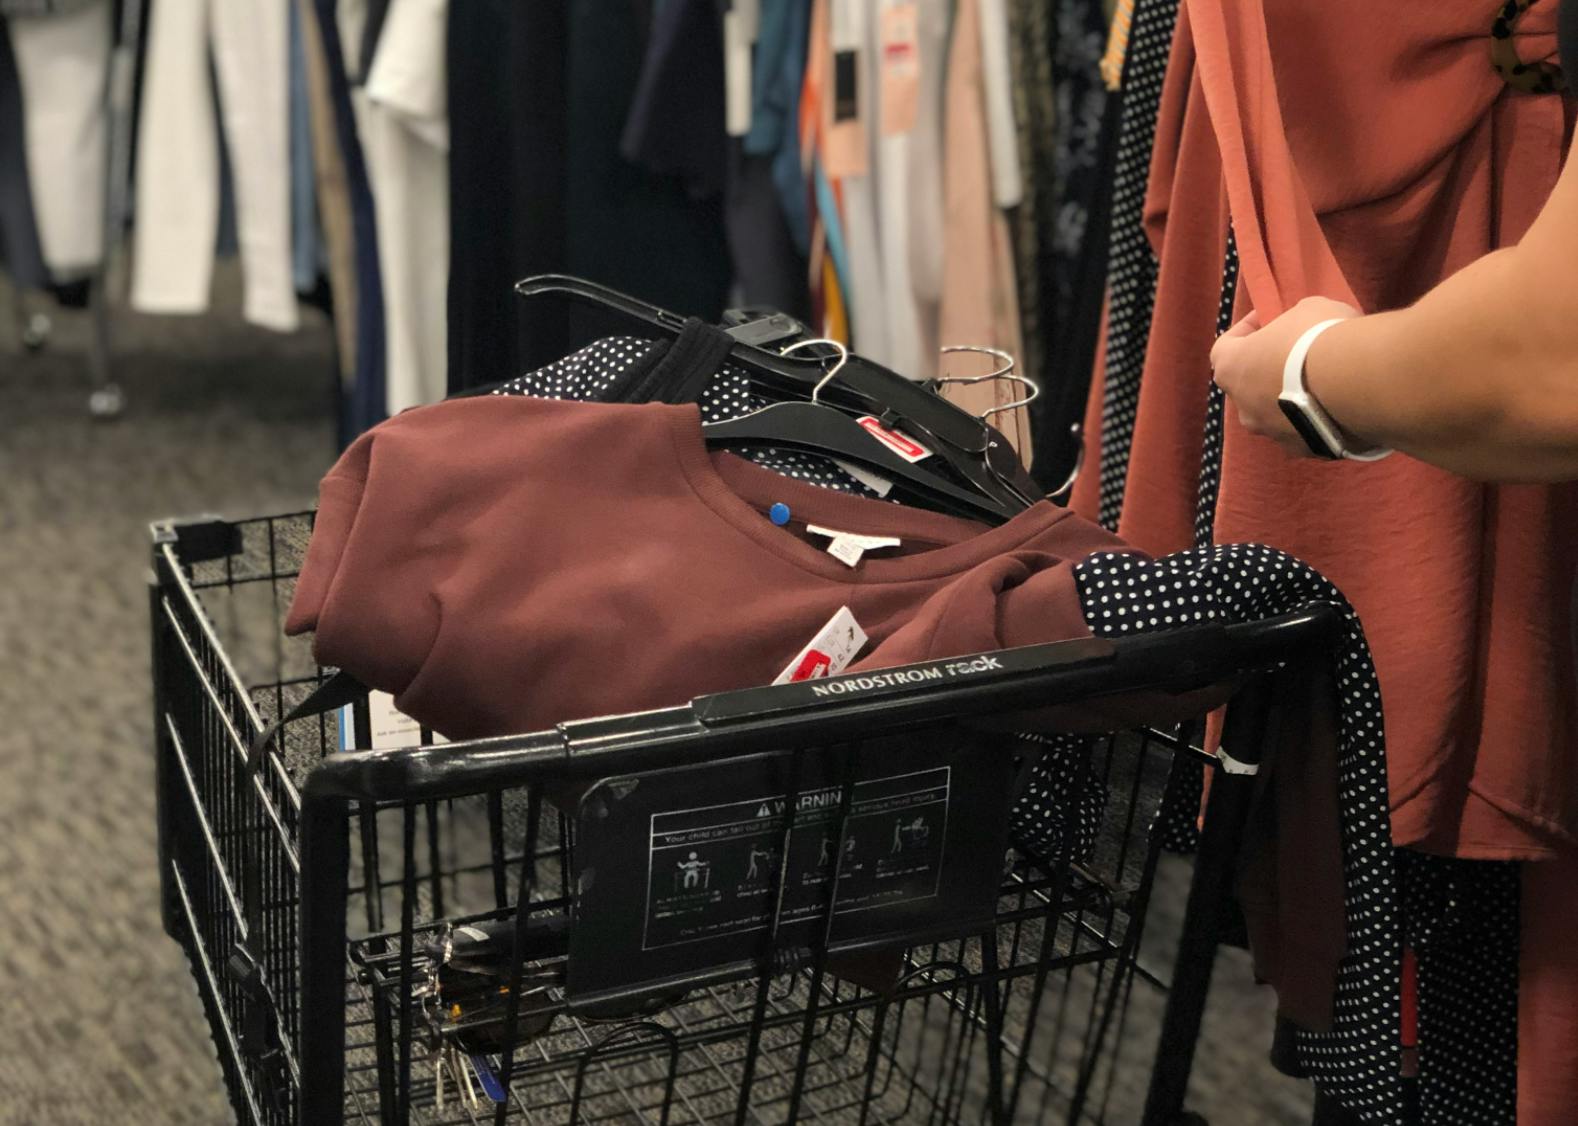 Nordstrom Rack Reopening with Weeklong 40% Off Sale - The Krazy Coupon Lady